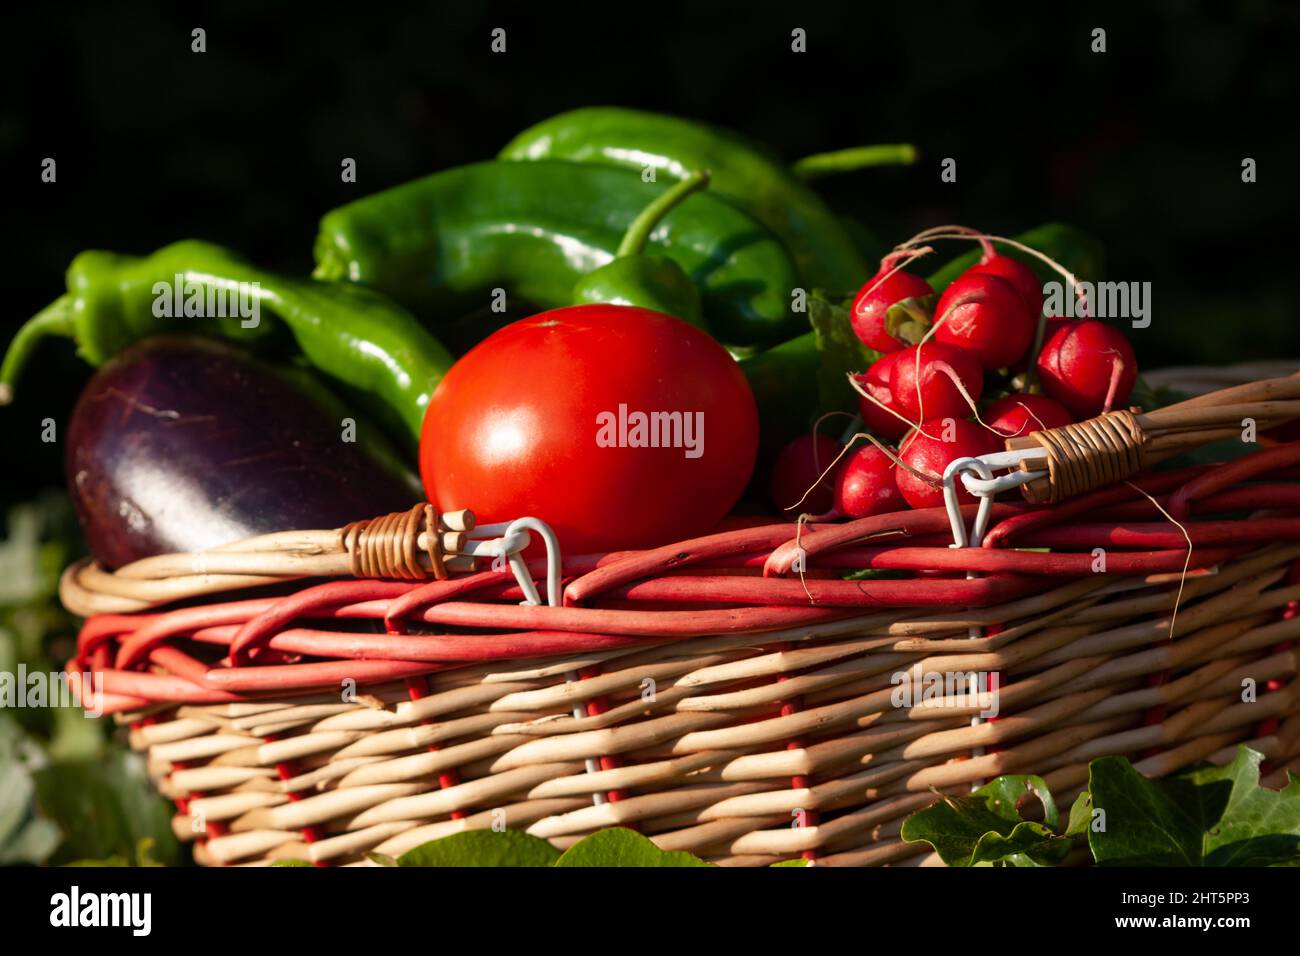 Basket with freshly picked vegetables on green leaves on a dark blurred background Stock Photo